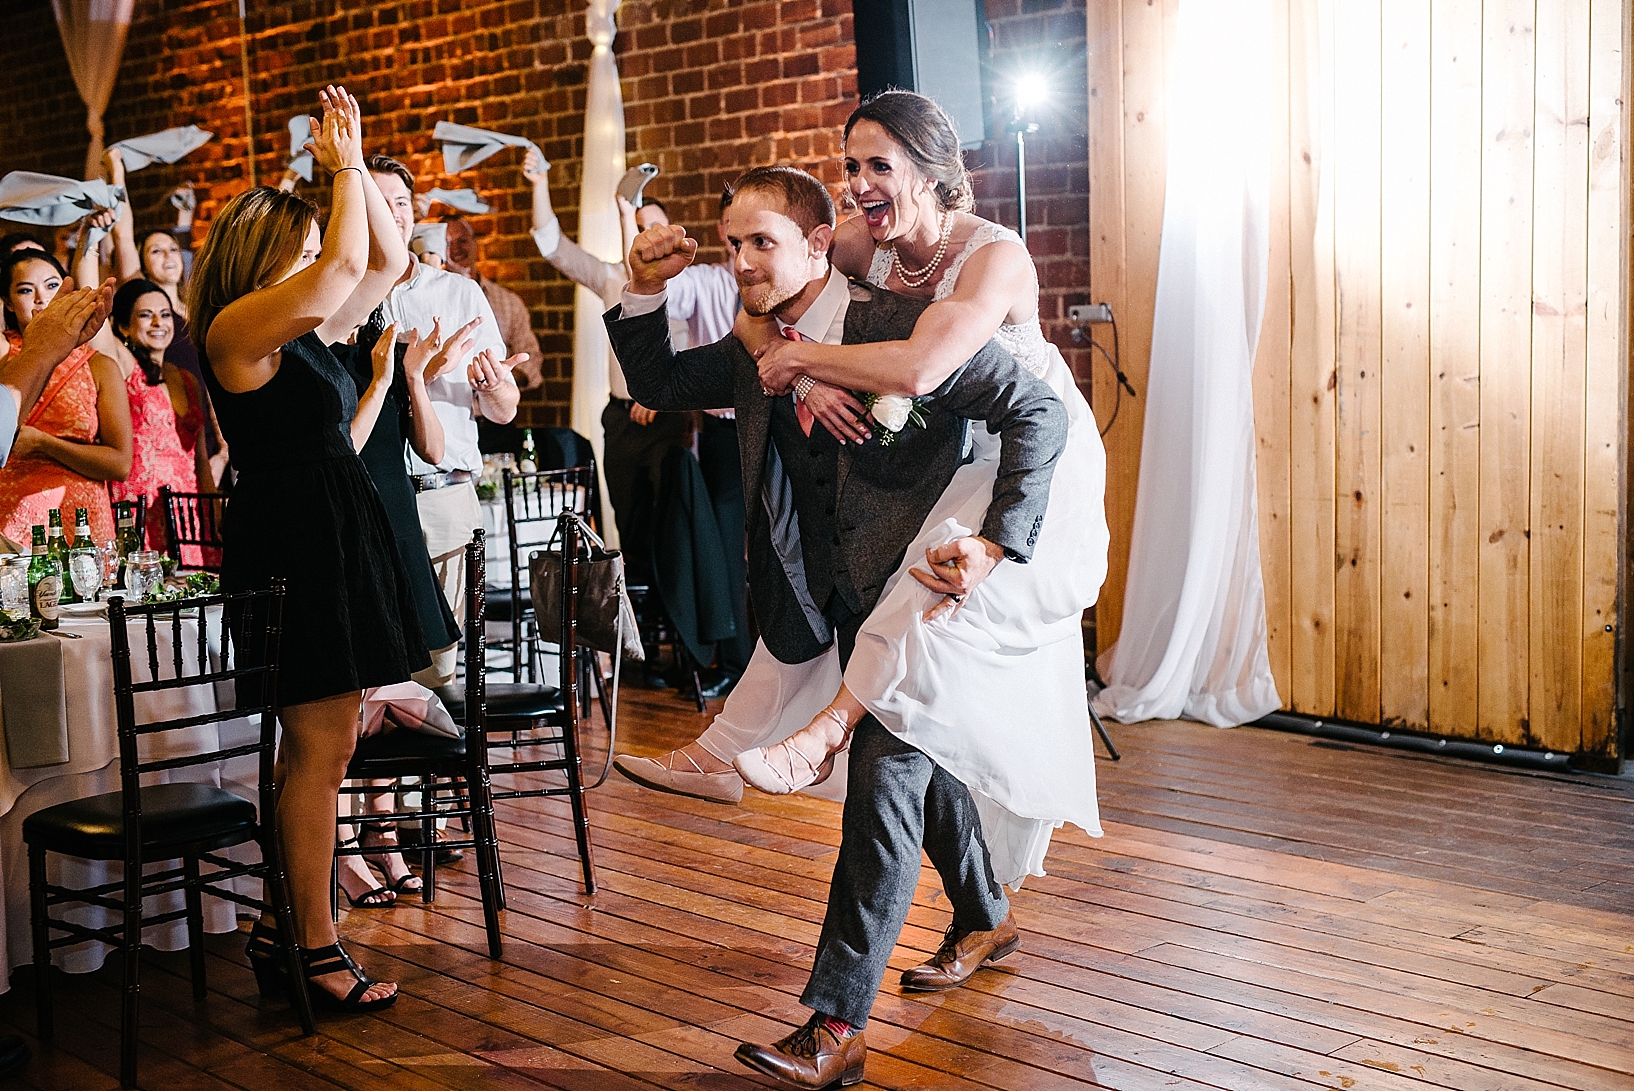 groom carrying bride piggy back into reception hall